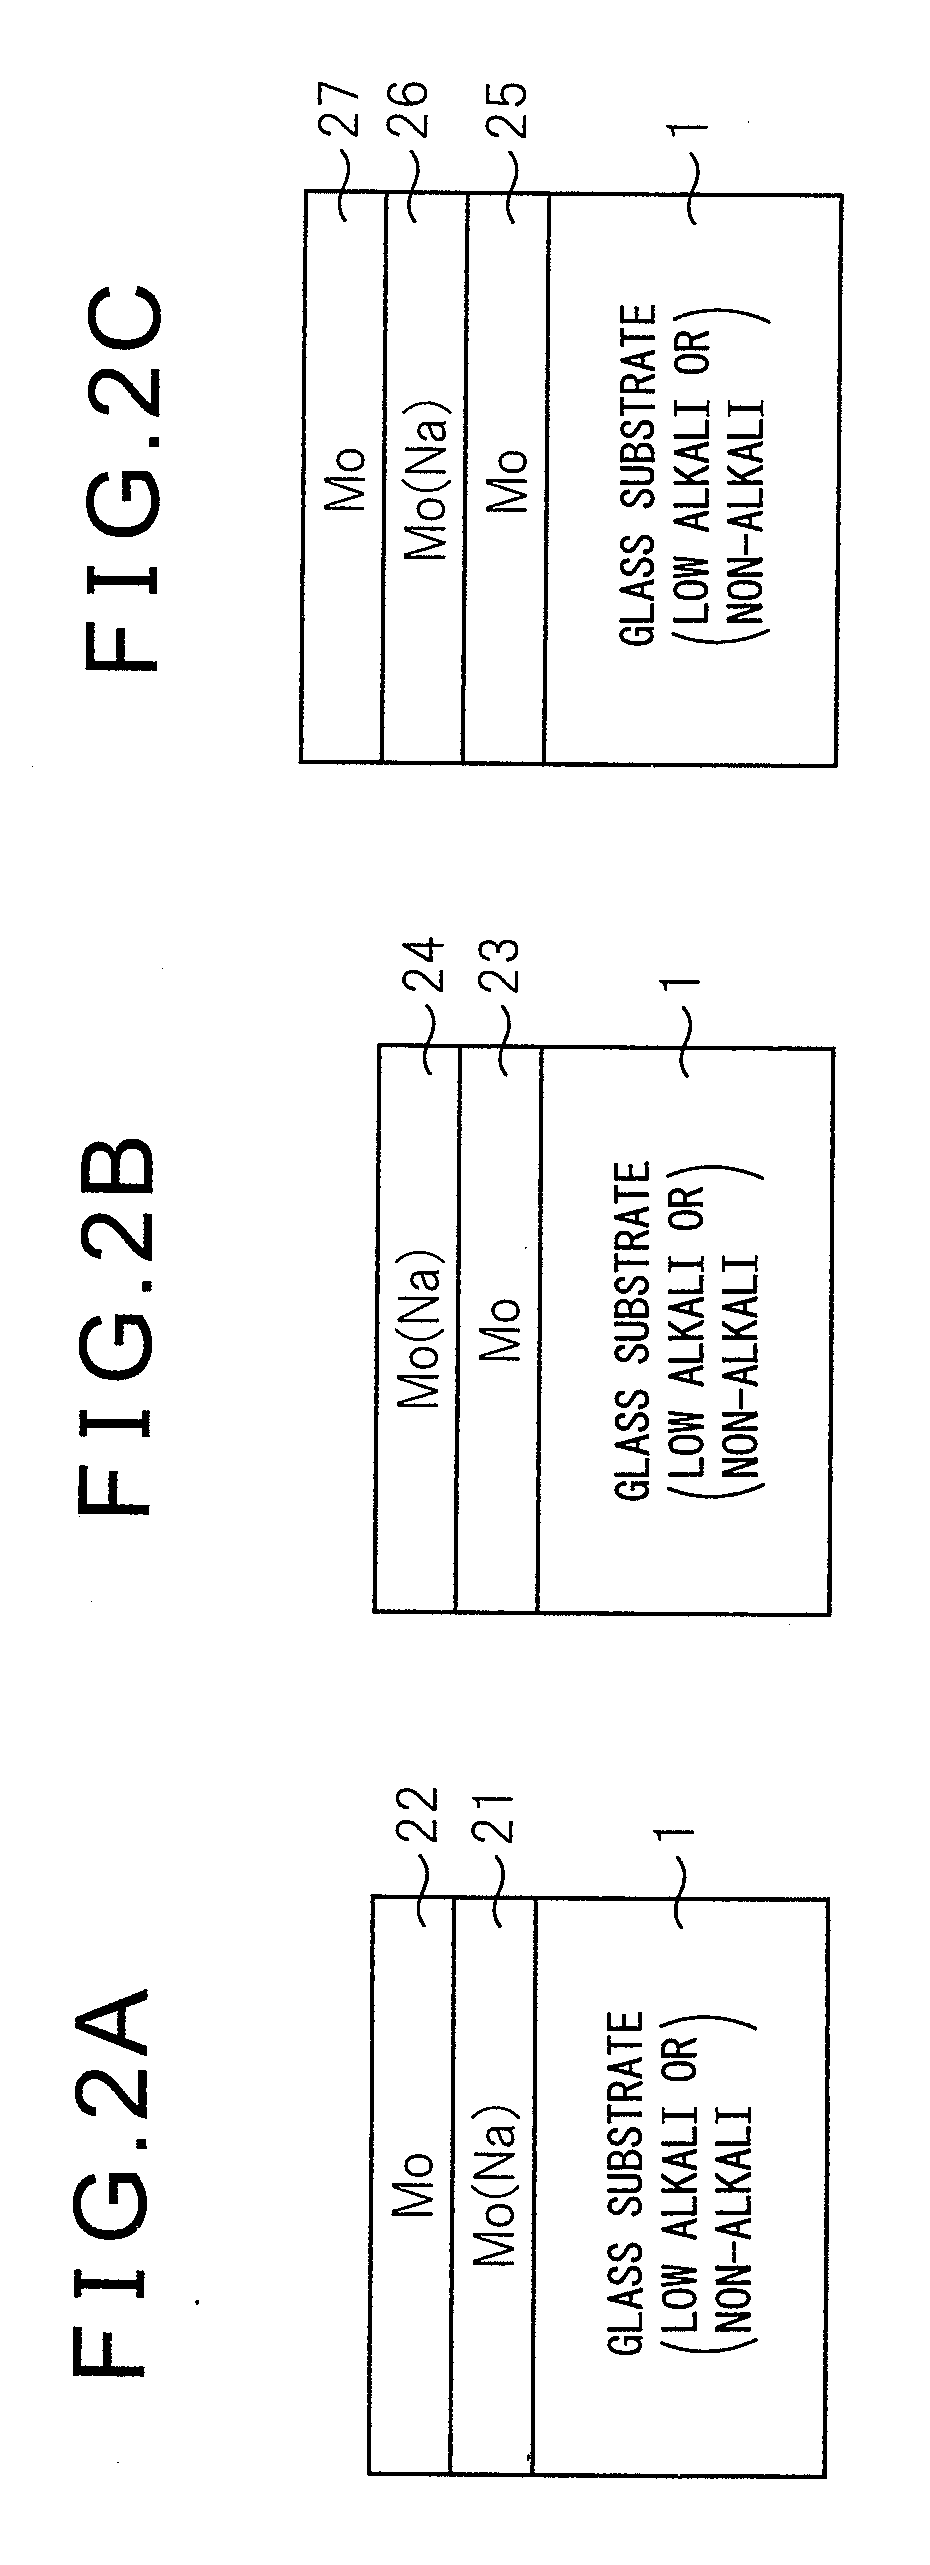 Method for manufacturing cis-based thin film solar cell